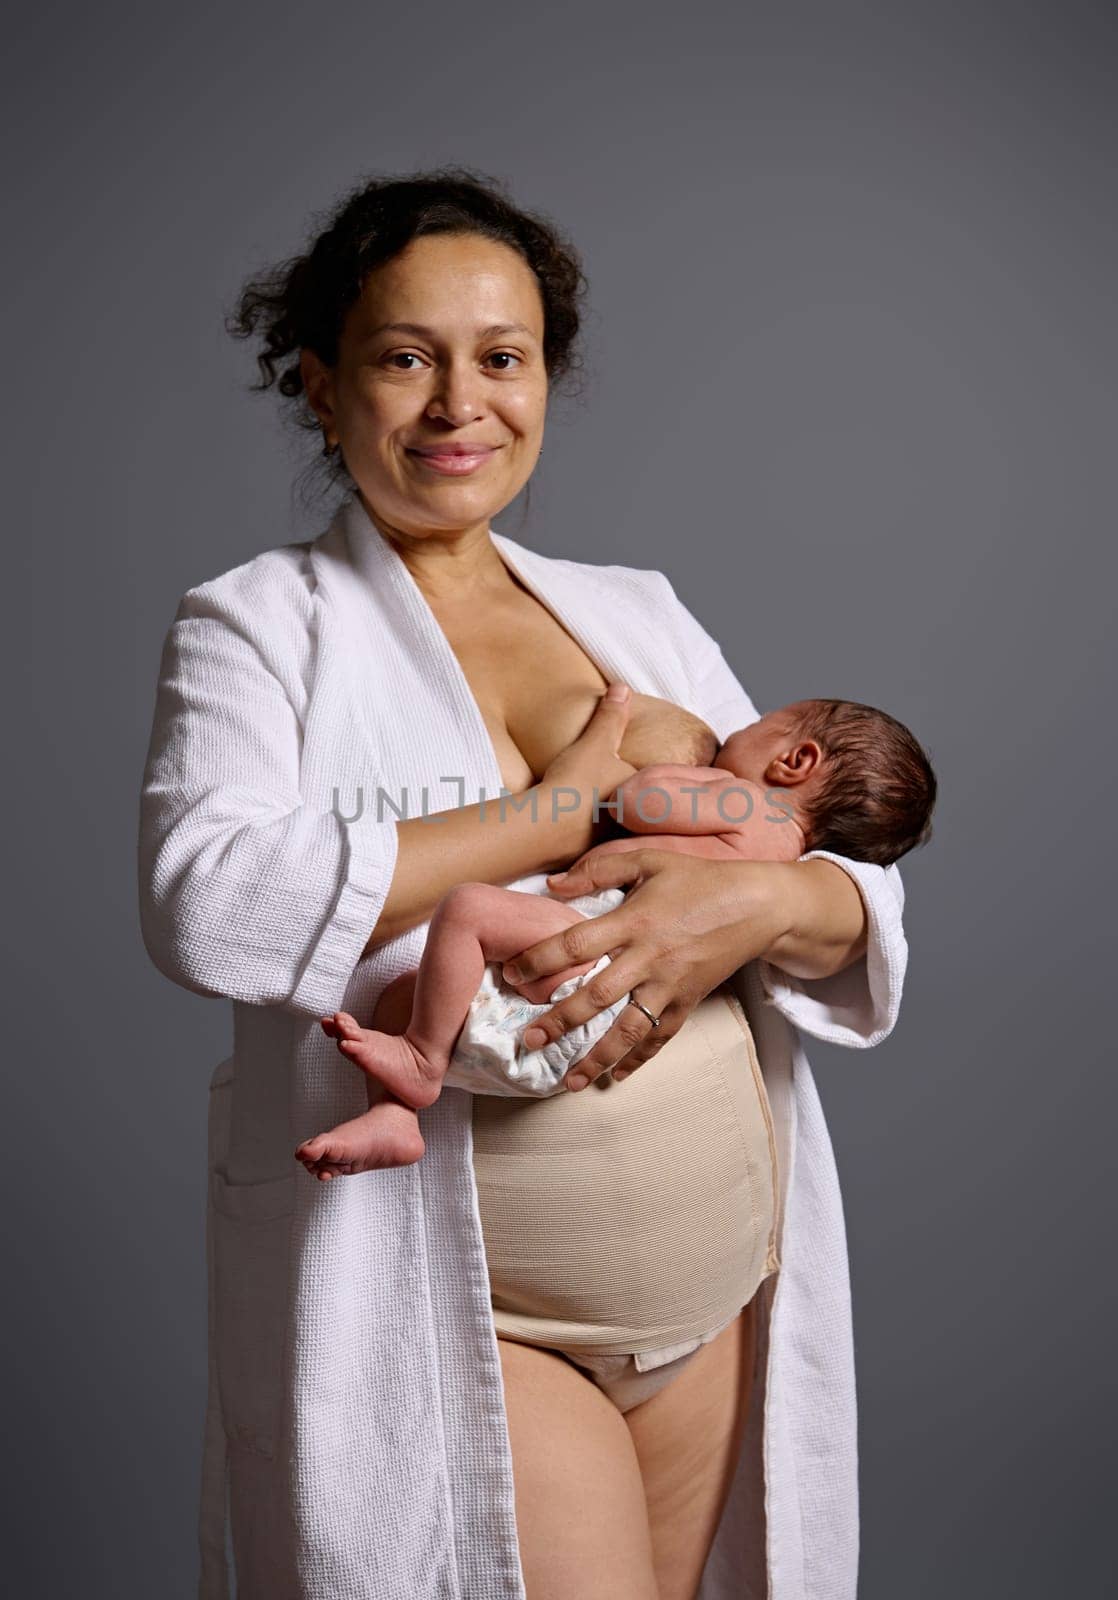 Authentic curly haired multi ethnic woman, happy young mother looking at camera, holding her newborn baby suckling at her breast, feeding him with healthy wholesome breast milk, isolated on gray